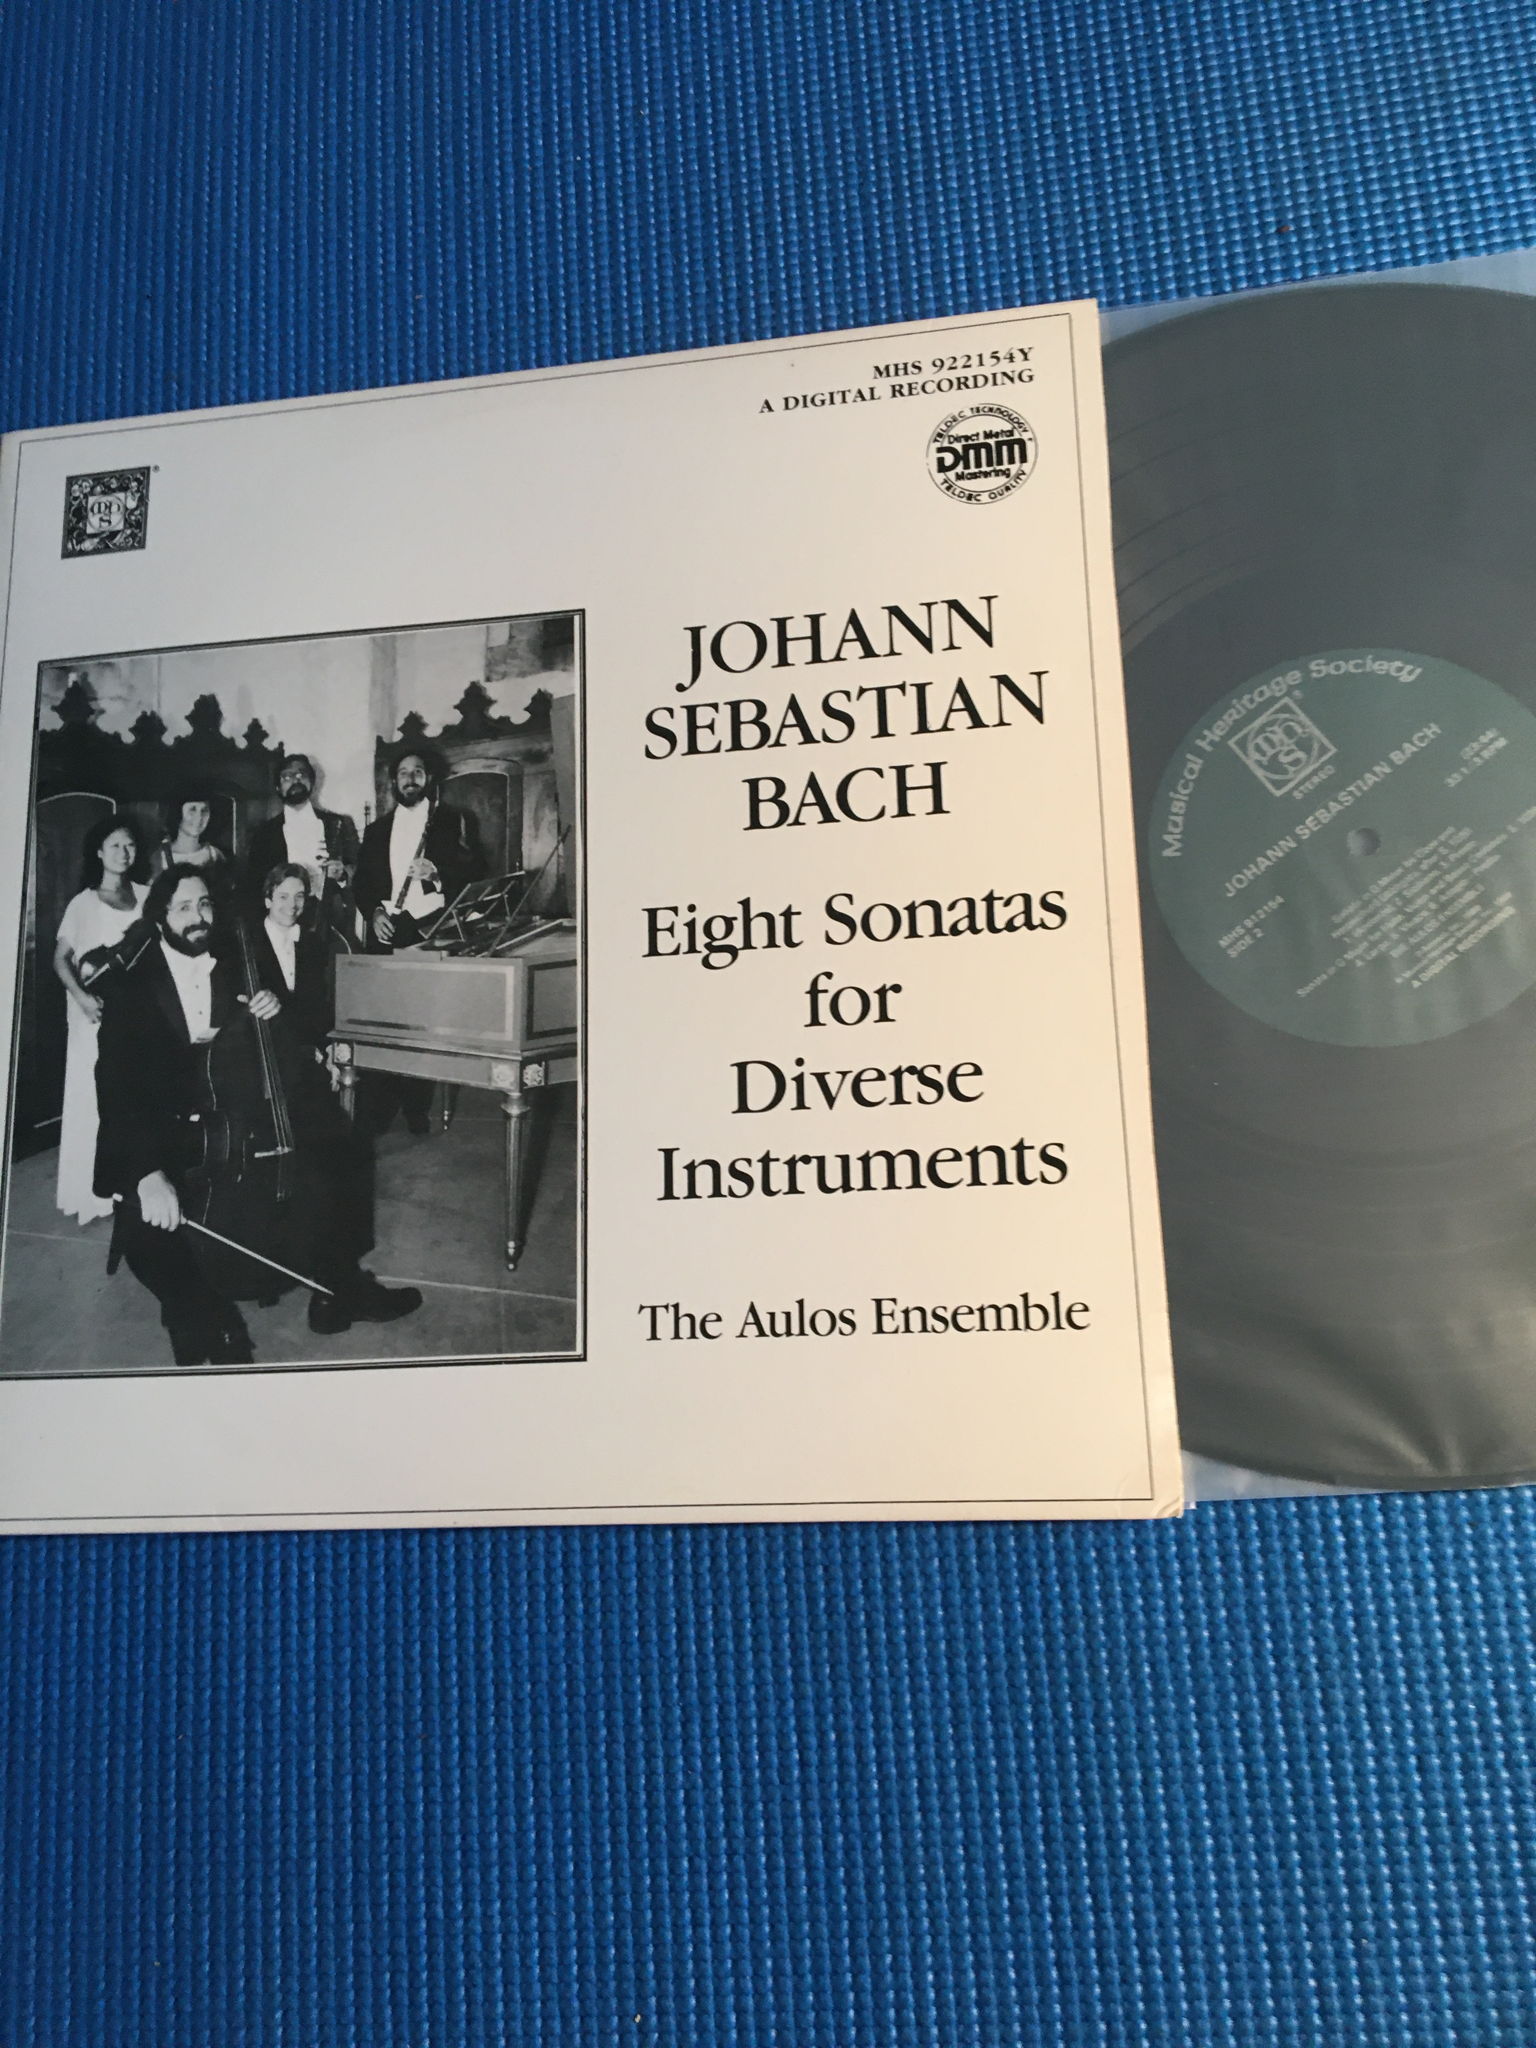 MHS 922154y DMM double Lp record Bach  The Aulos Ensemb... 2